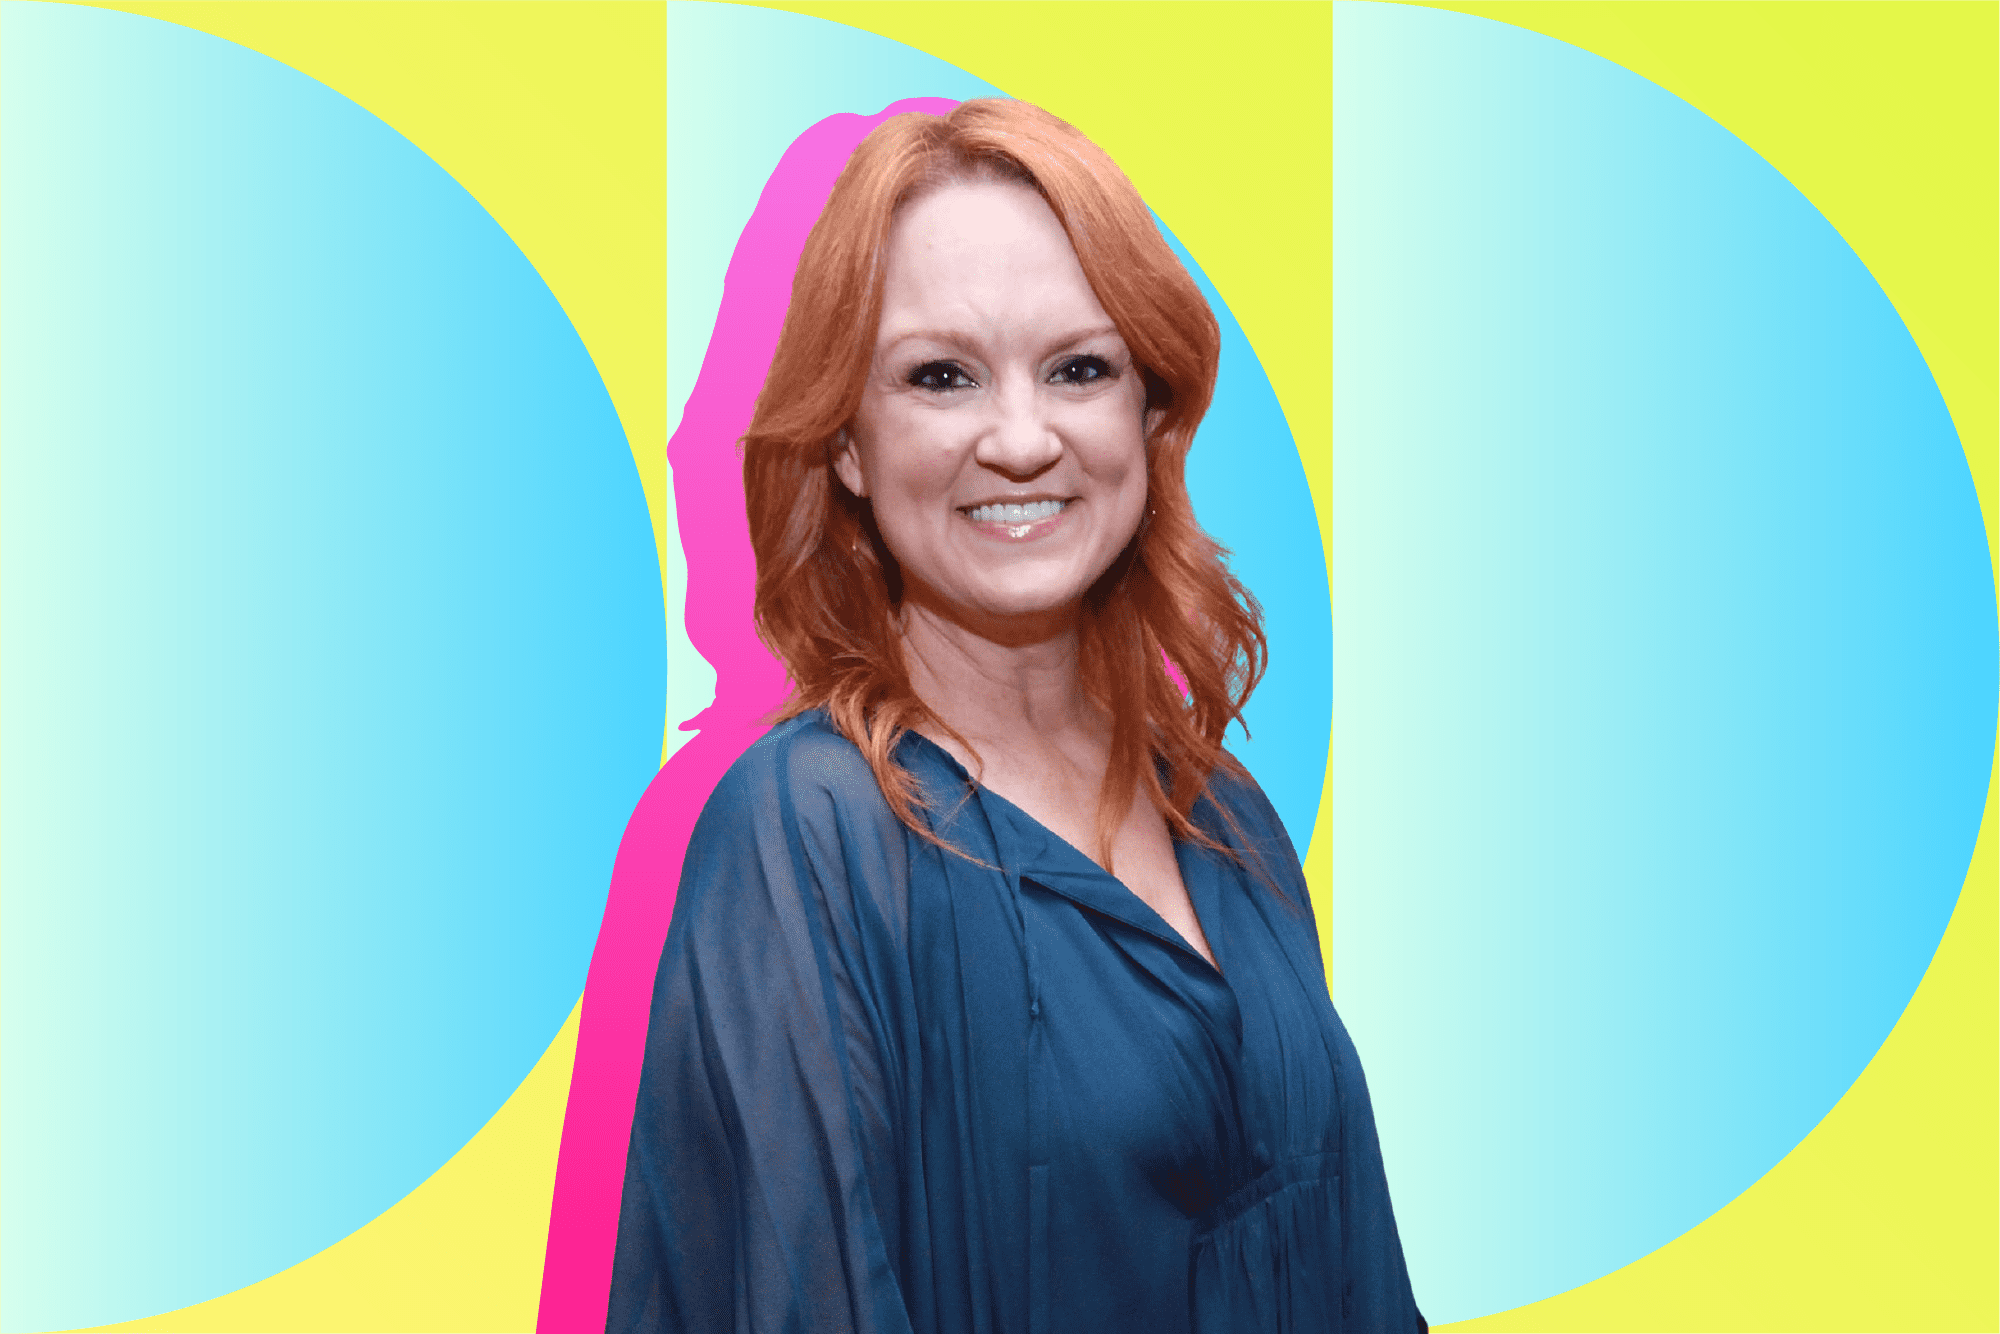 Pioneer Woman' Ree Drummond just released a line of affordable